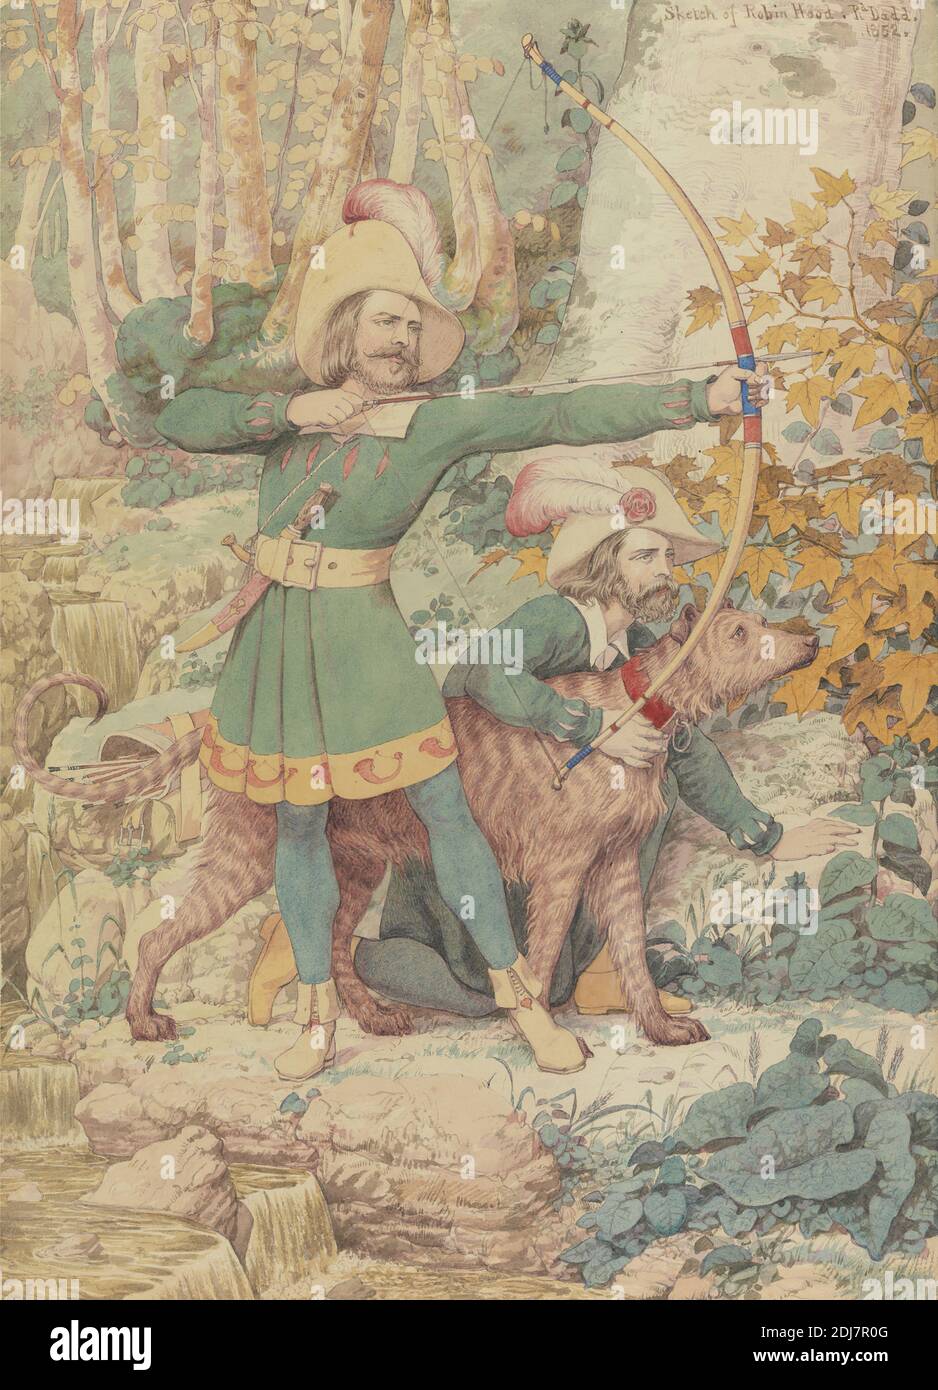 Sketch of Robin Hood, Richard Dadd, 1817–1886, British, 1852, Watercolor and graphite on moderately thick, slightly textured, cream wove paper, Sheet: 14 1/8 x 10 1/8 inches (35.9 x 25.7 cm), archer, archery, arrow, bows (weapons), dog (animal), feathers, folklore, hats, hero, illustration, leaves, man, sword, trees Stock Photo